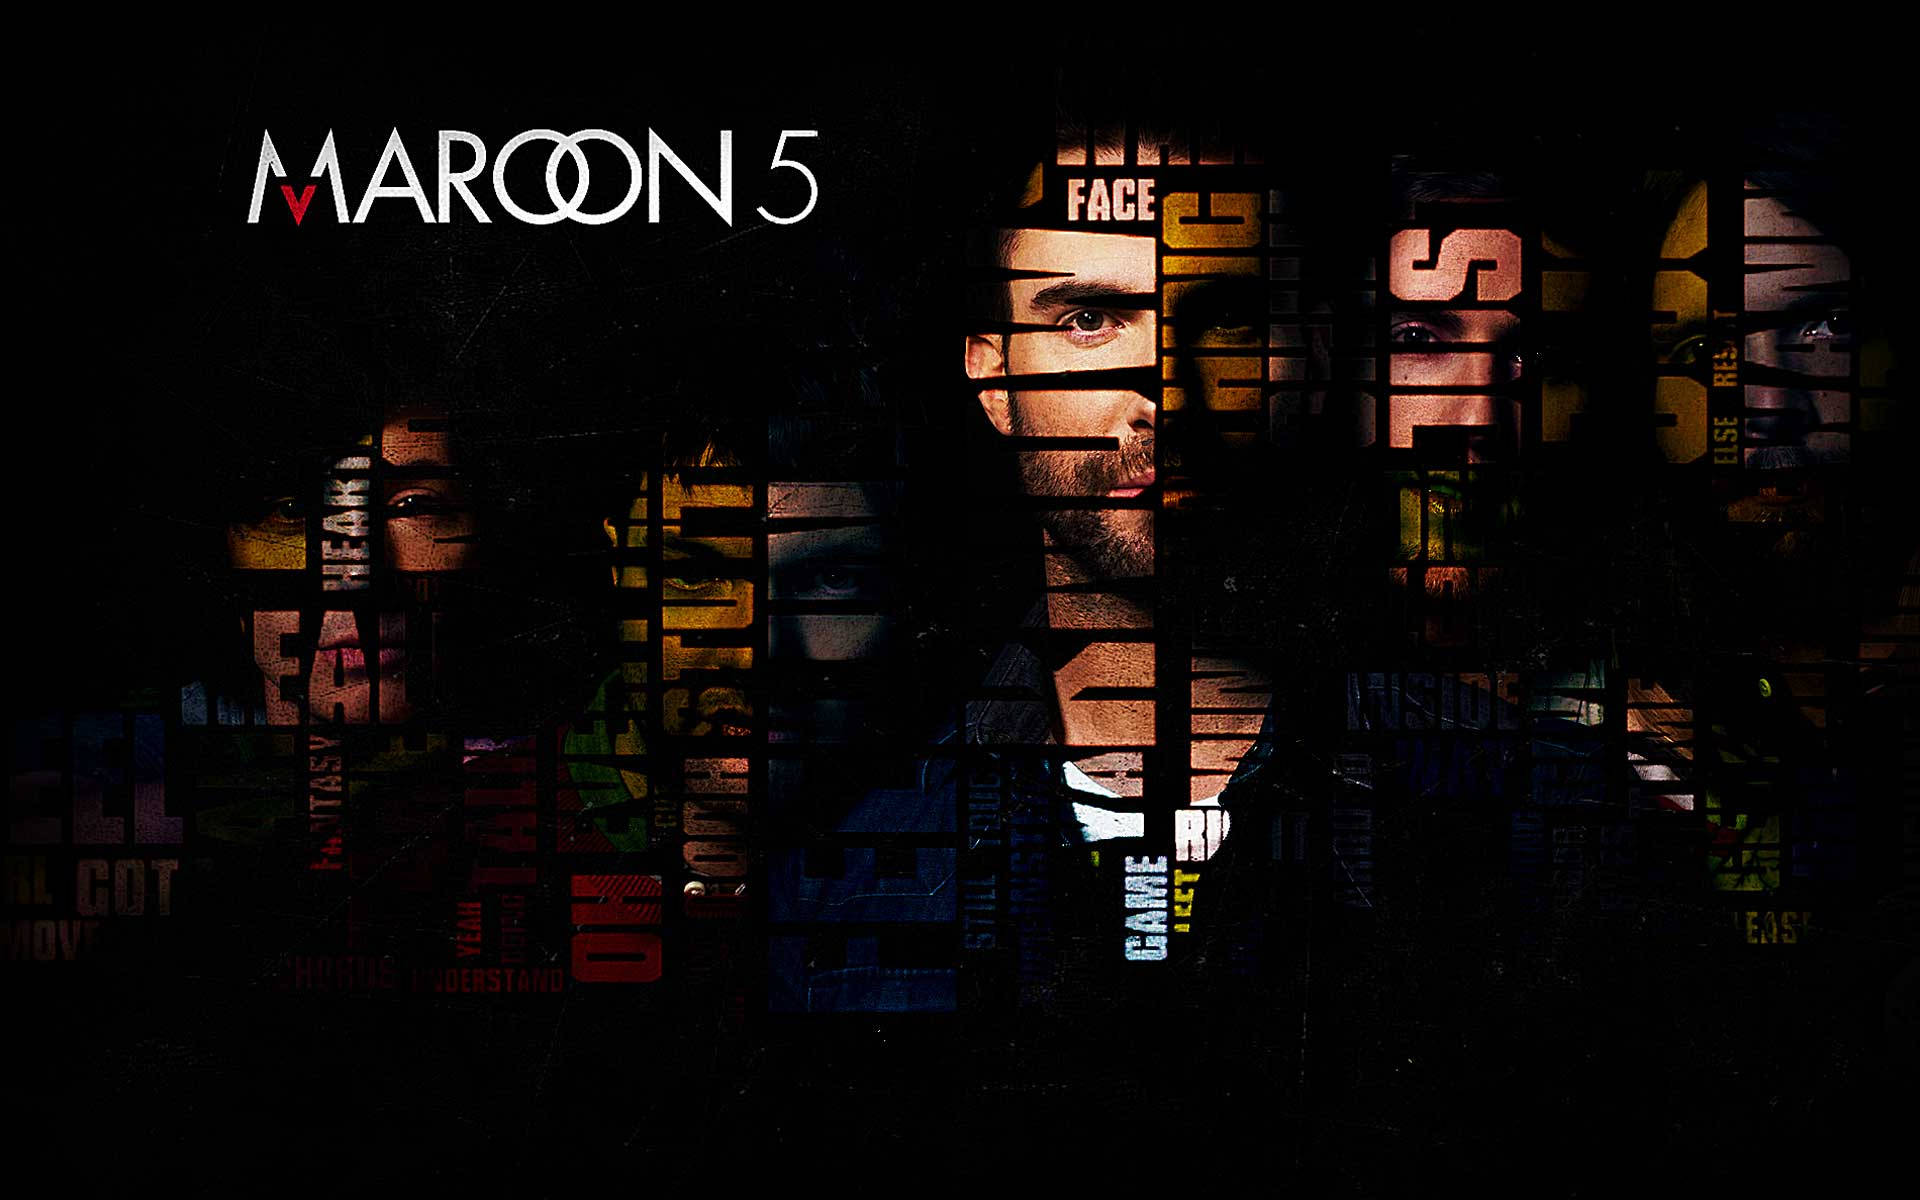 Maroon 5 Words On Faces Wallpaper